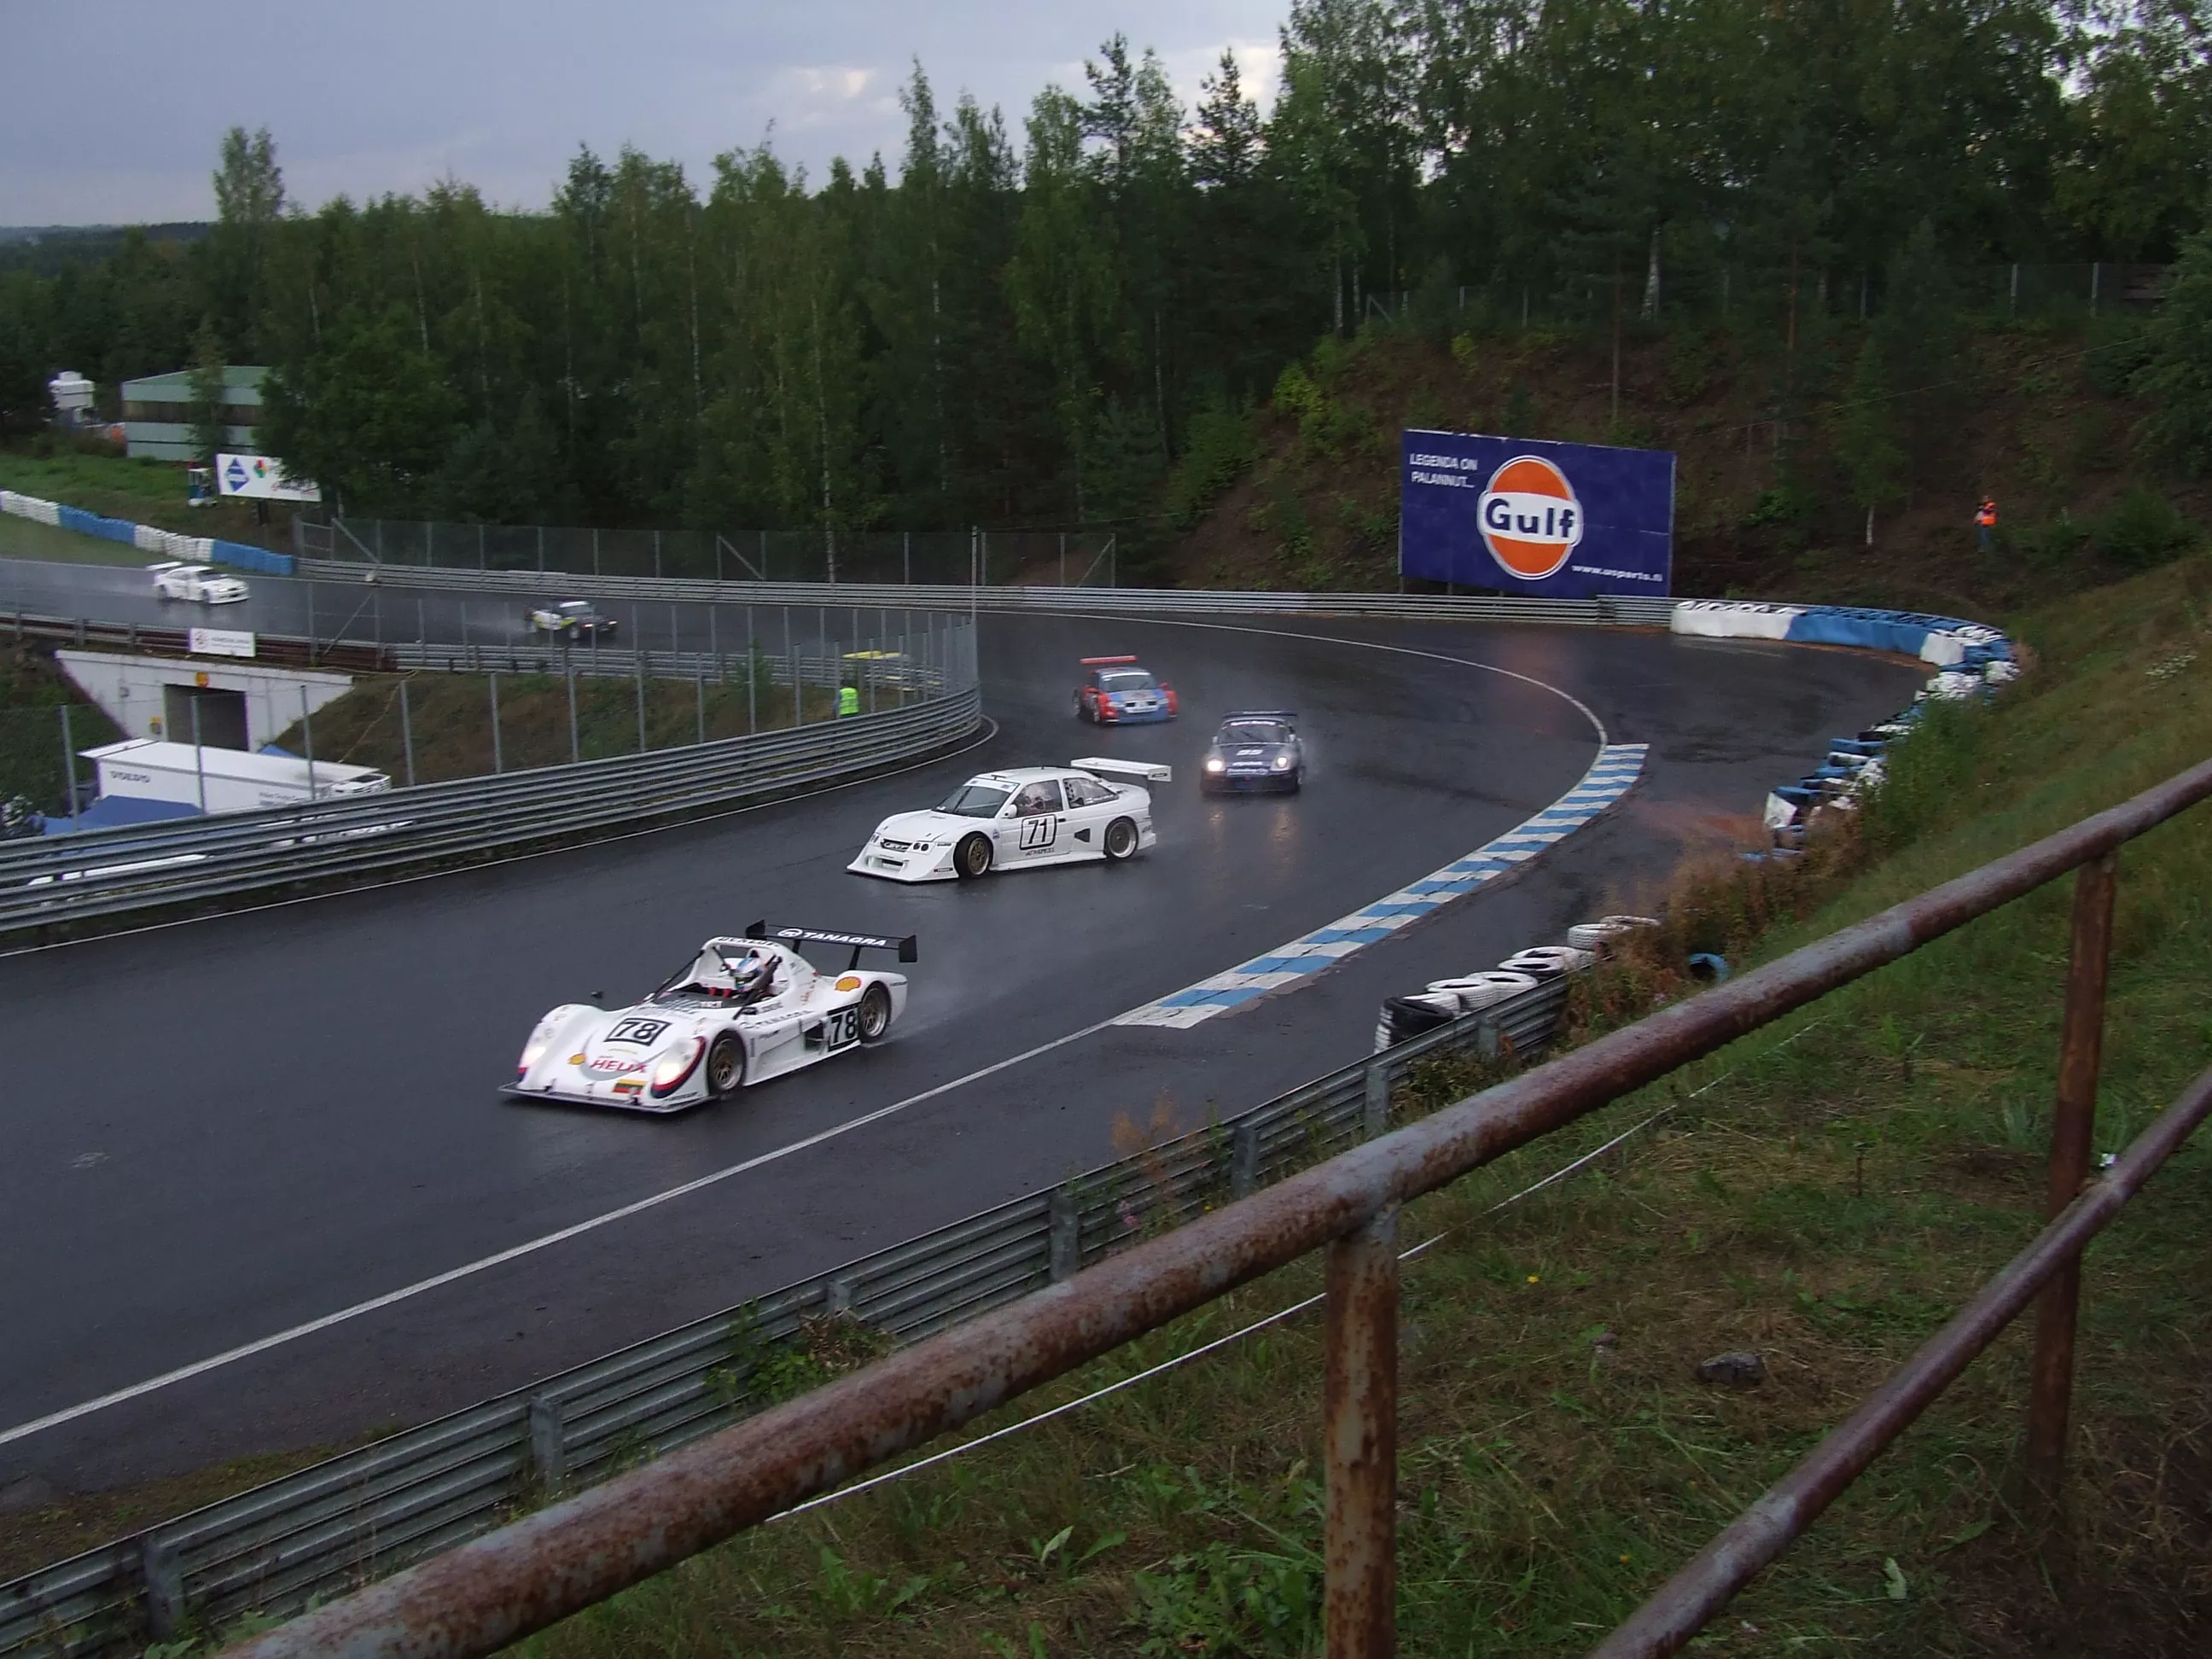 Ahvenisto Race Circuit in Finland, Europe | Racing,Motorcycles - Rated 4